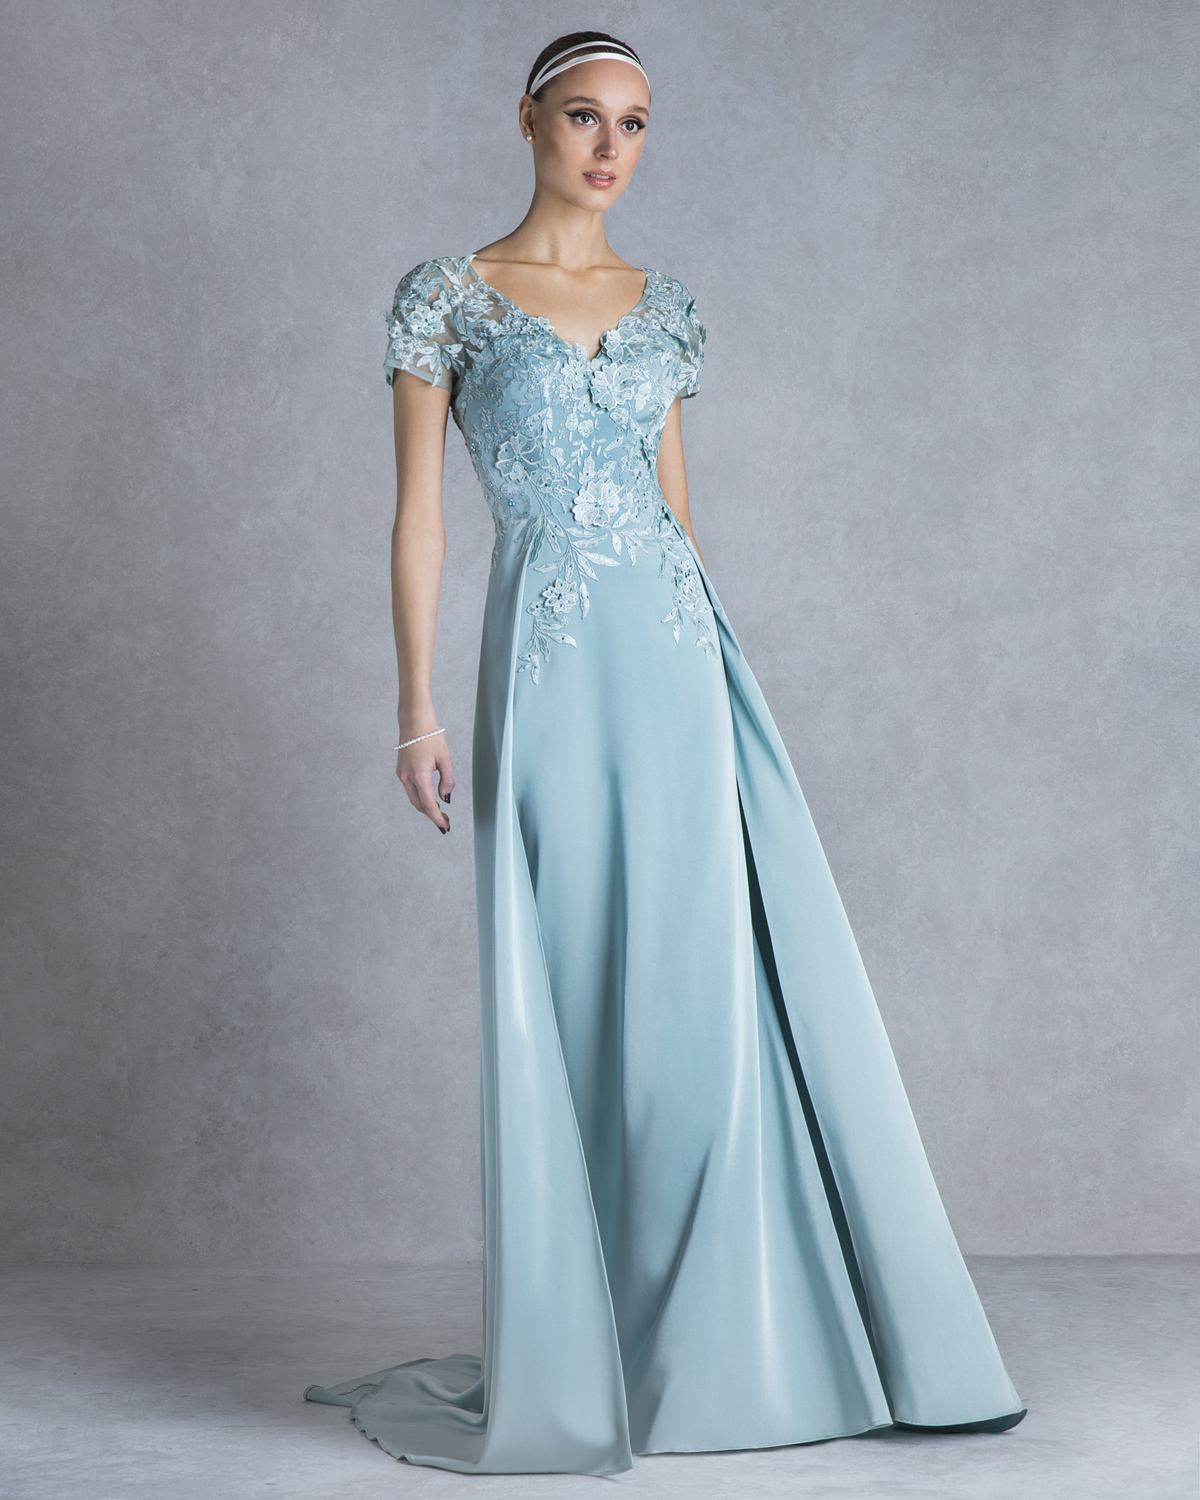 Long evening dress with lace for the mother of the bride